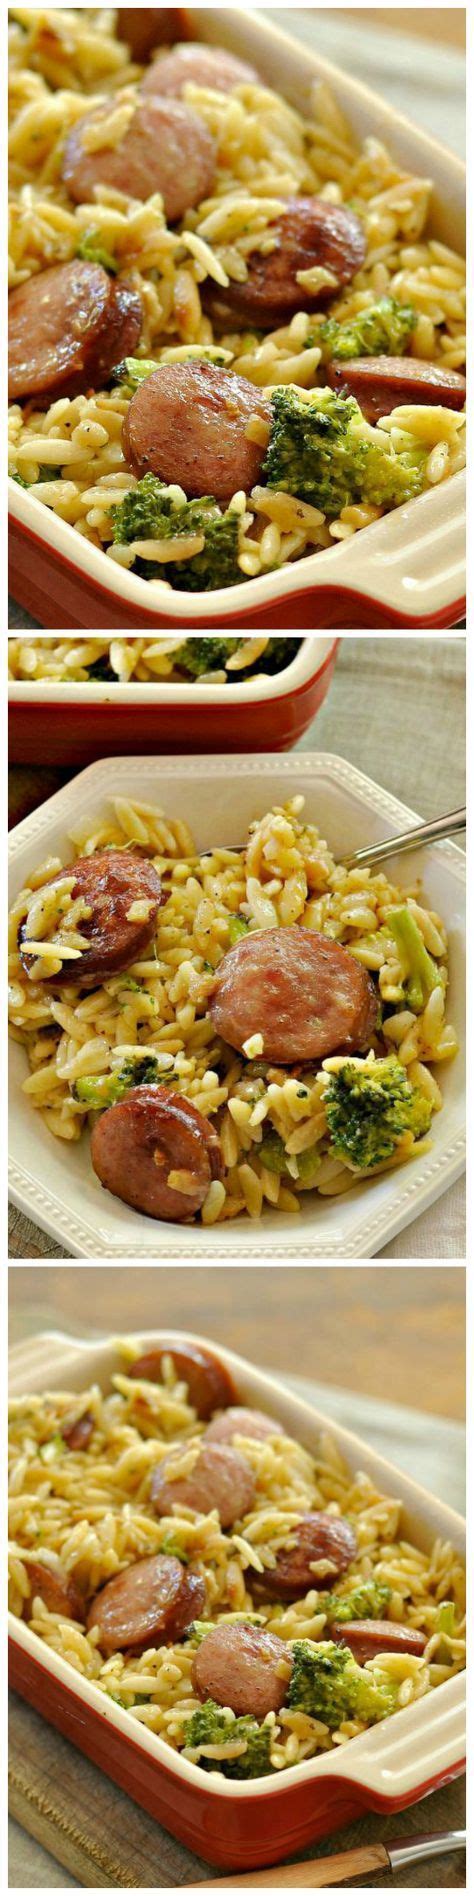 Louise comes up with some wonderful recipes like her chocolate coffee coconut truffles and has stuff that i would absolutely never i often bought the applegate chicken and apple sausages as a quick microwaveable snack. Used chicken and apple sausage; whole carton of fresh ...